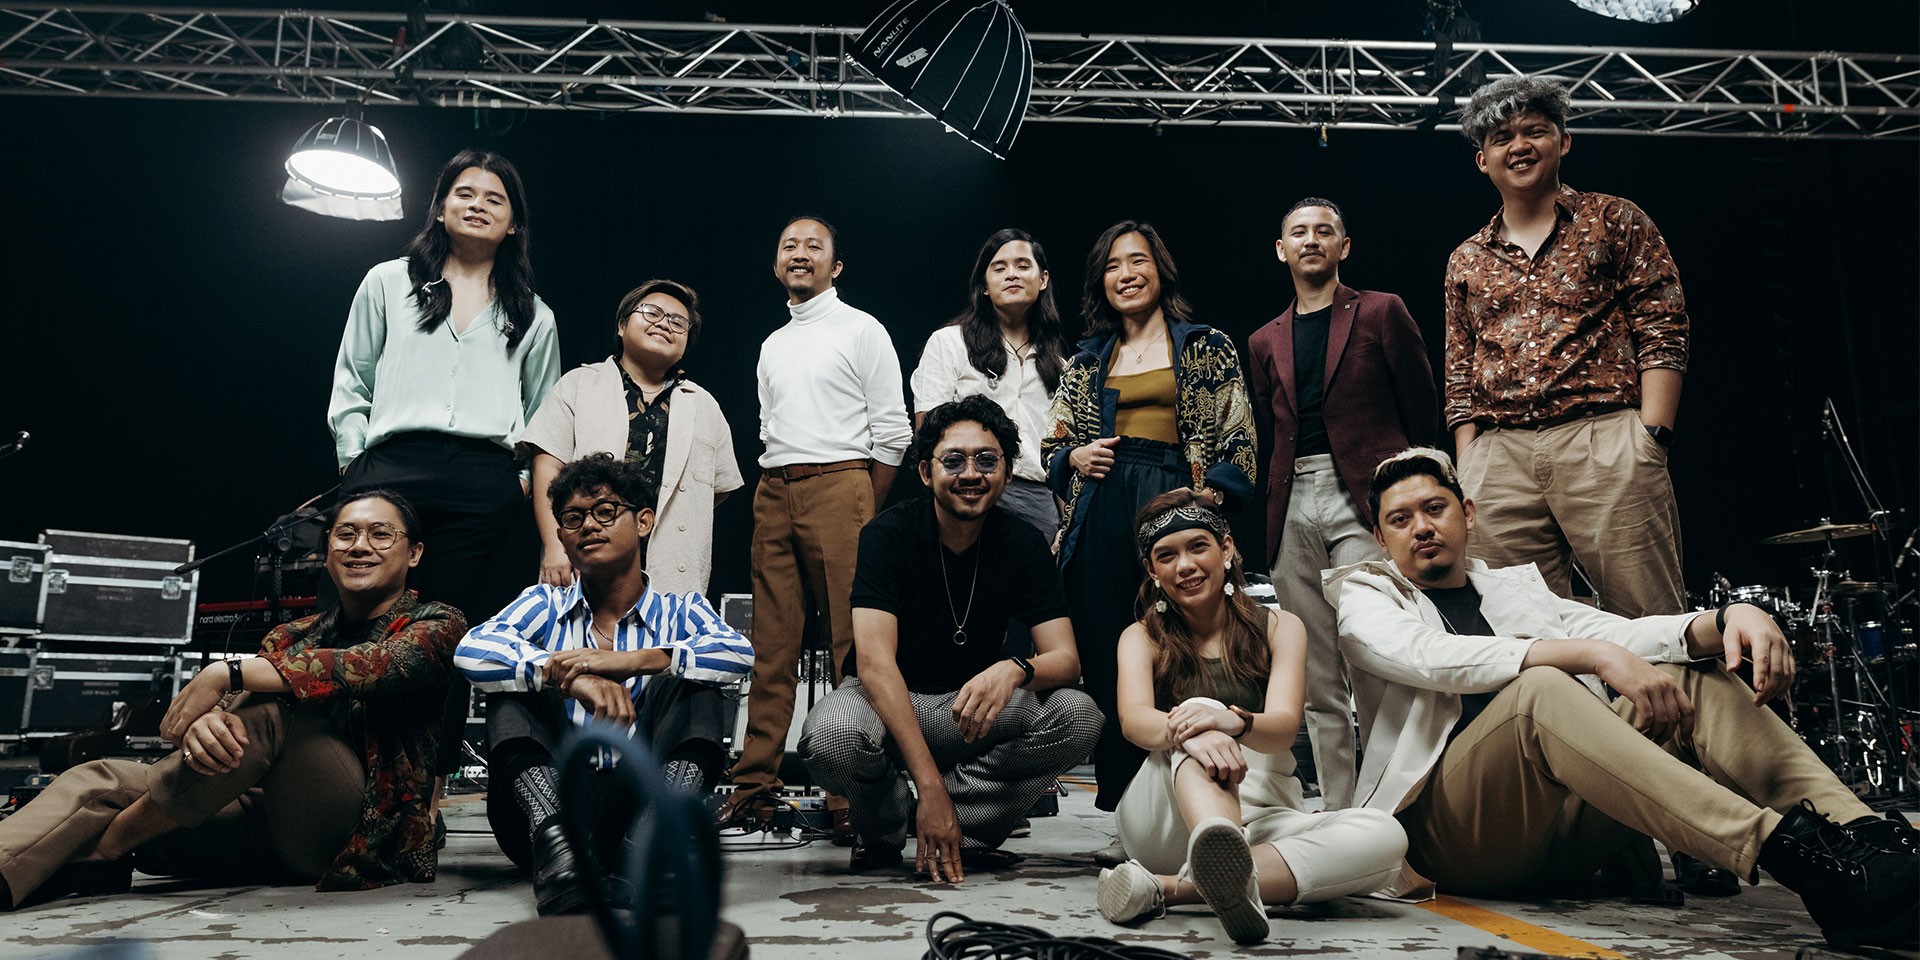 Ben&Ben teams up with Pamungkas for a new version of 'Paninindigan Kita' with 'Stand By You' - listen